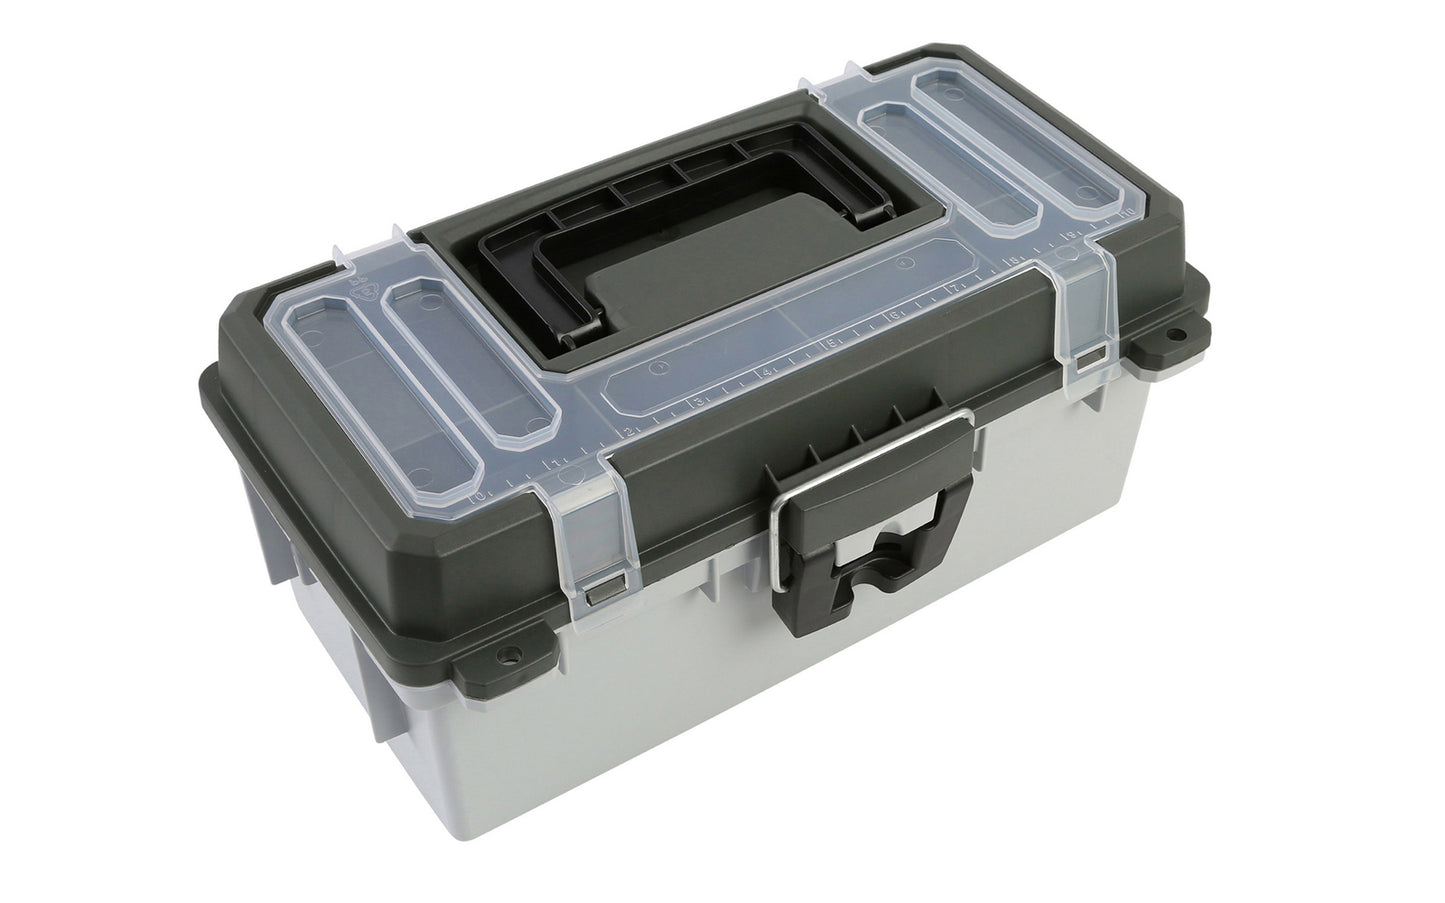 13" Tackle / Toolbox. This tackle box / small tool box is ideal for keeping your tackle & fishing gear, small tool parts organized. Overall size: 13" Long  x  6" High x 7-1/2" Wide. Water Resistant. 076812155221. Made in USA. Sheffield Model No. 12670.